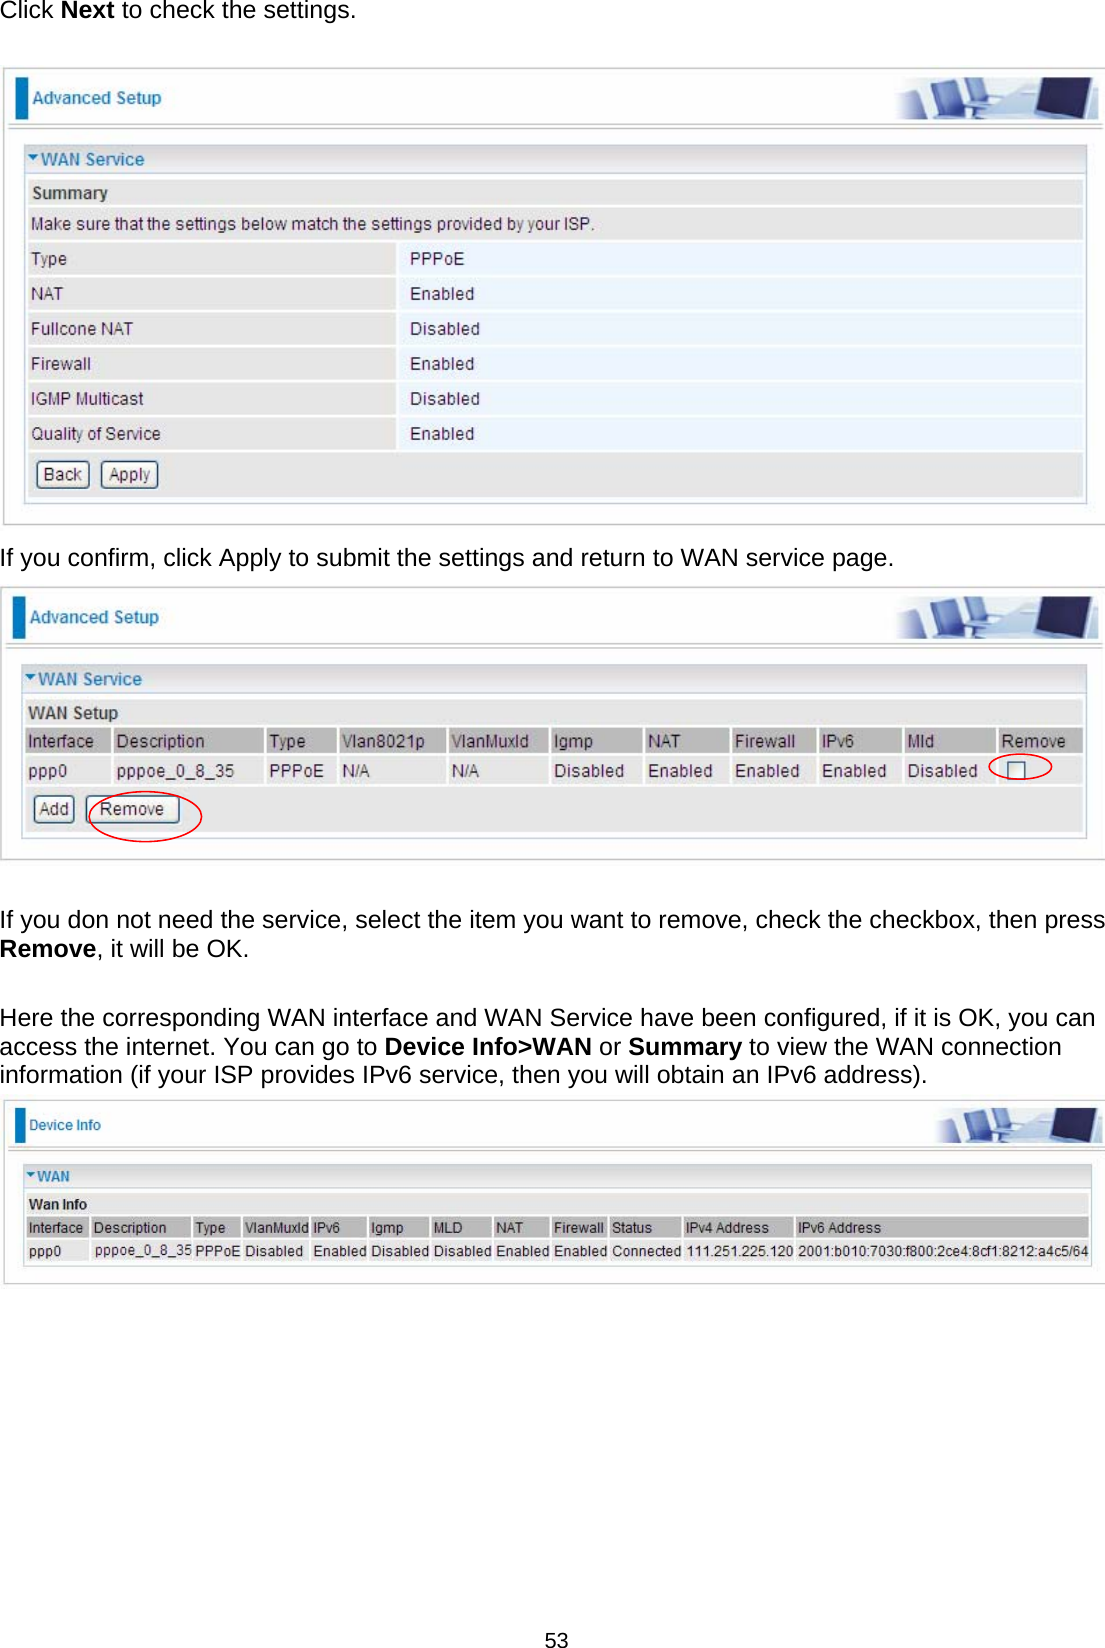  53 Click Next to check the settings.    If you confirm, click Apply to submit the settings and return to WAN service page.   If you don not need the service, select the item you want to remove, check the checkbox, then press Remove, it will be OK.  Here the corresponding WAN interface and WAN Service have been configured, if it is OK, you can access the internet. You can go to Device Info&gt;WAN or Summary to view the WAN connection information (if your ISP provides IPv6 service, then you will obtain an IPv6 address).           